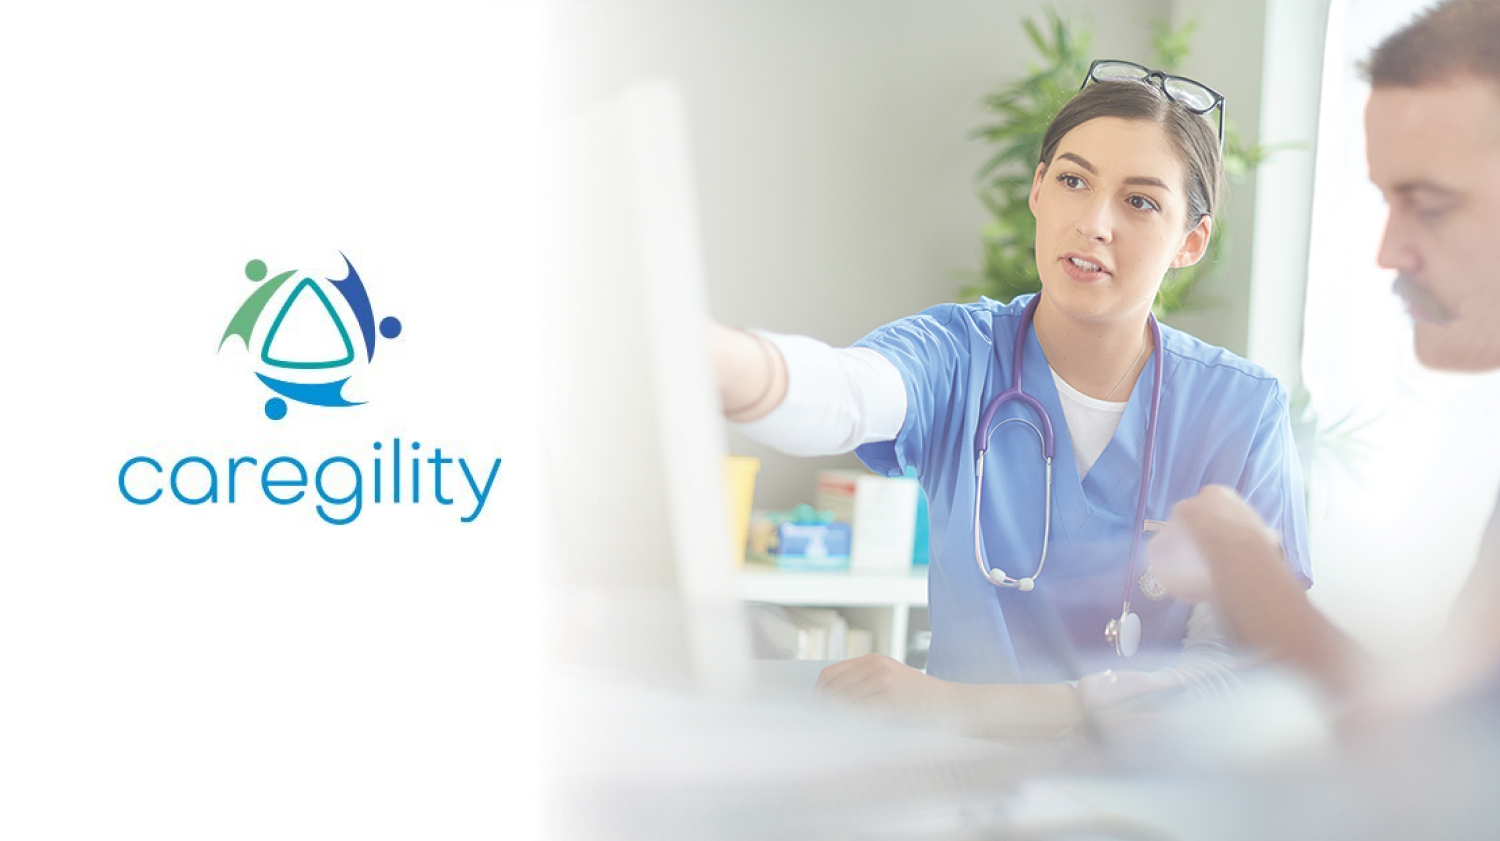 Caregility Connects with Agency Creative To Grow Their Virtual Care